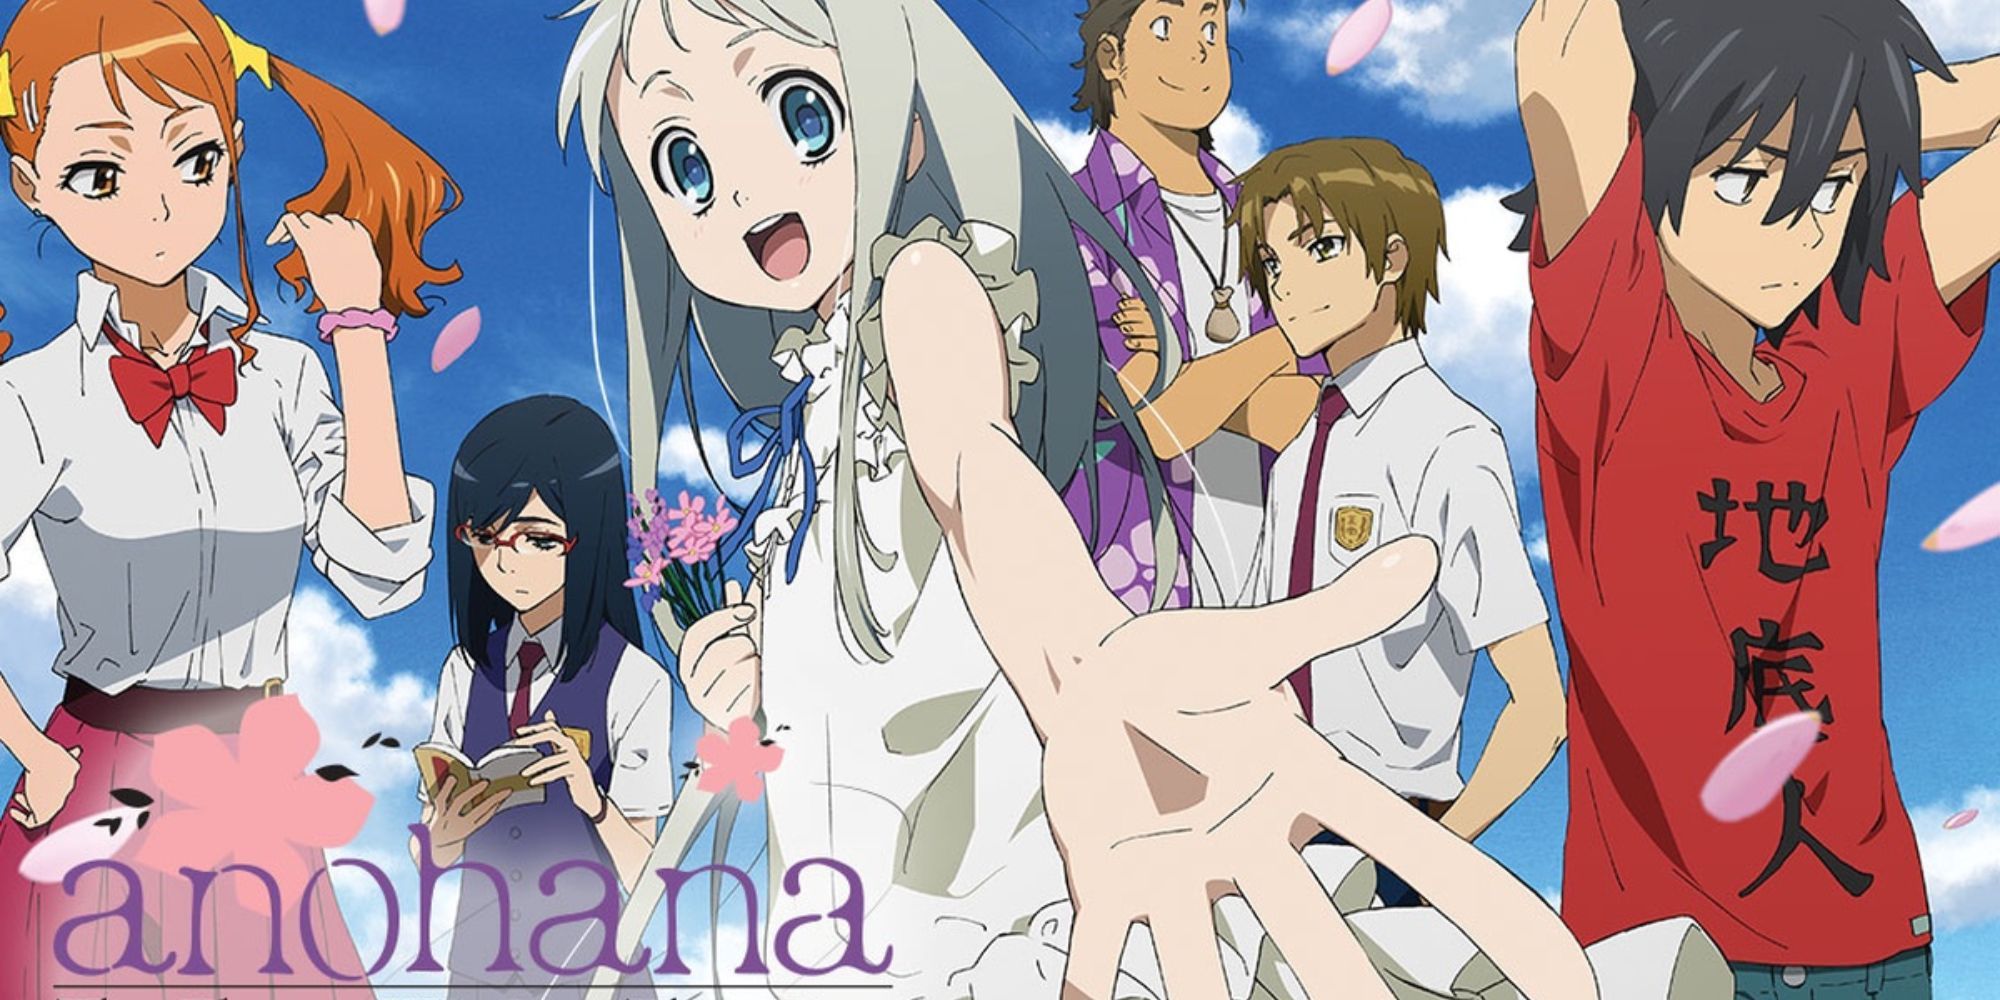 Anohana The Flower We Saw That Day